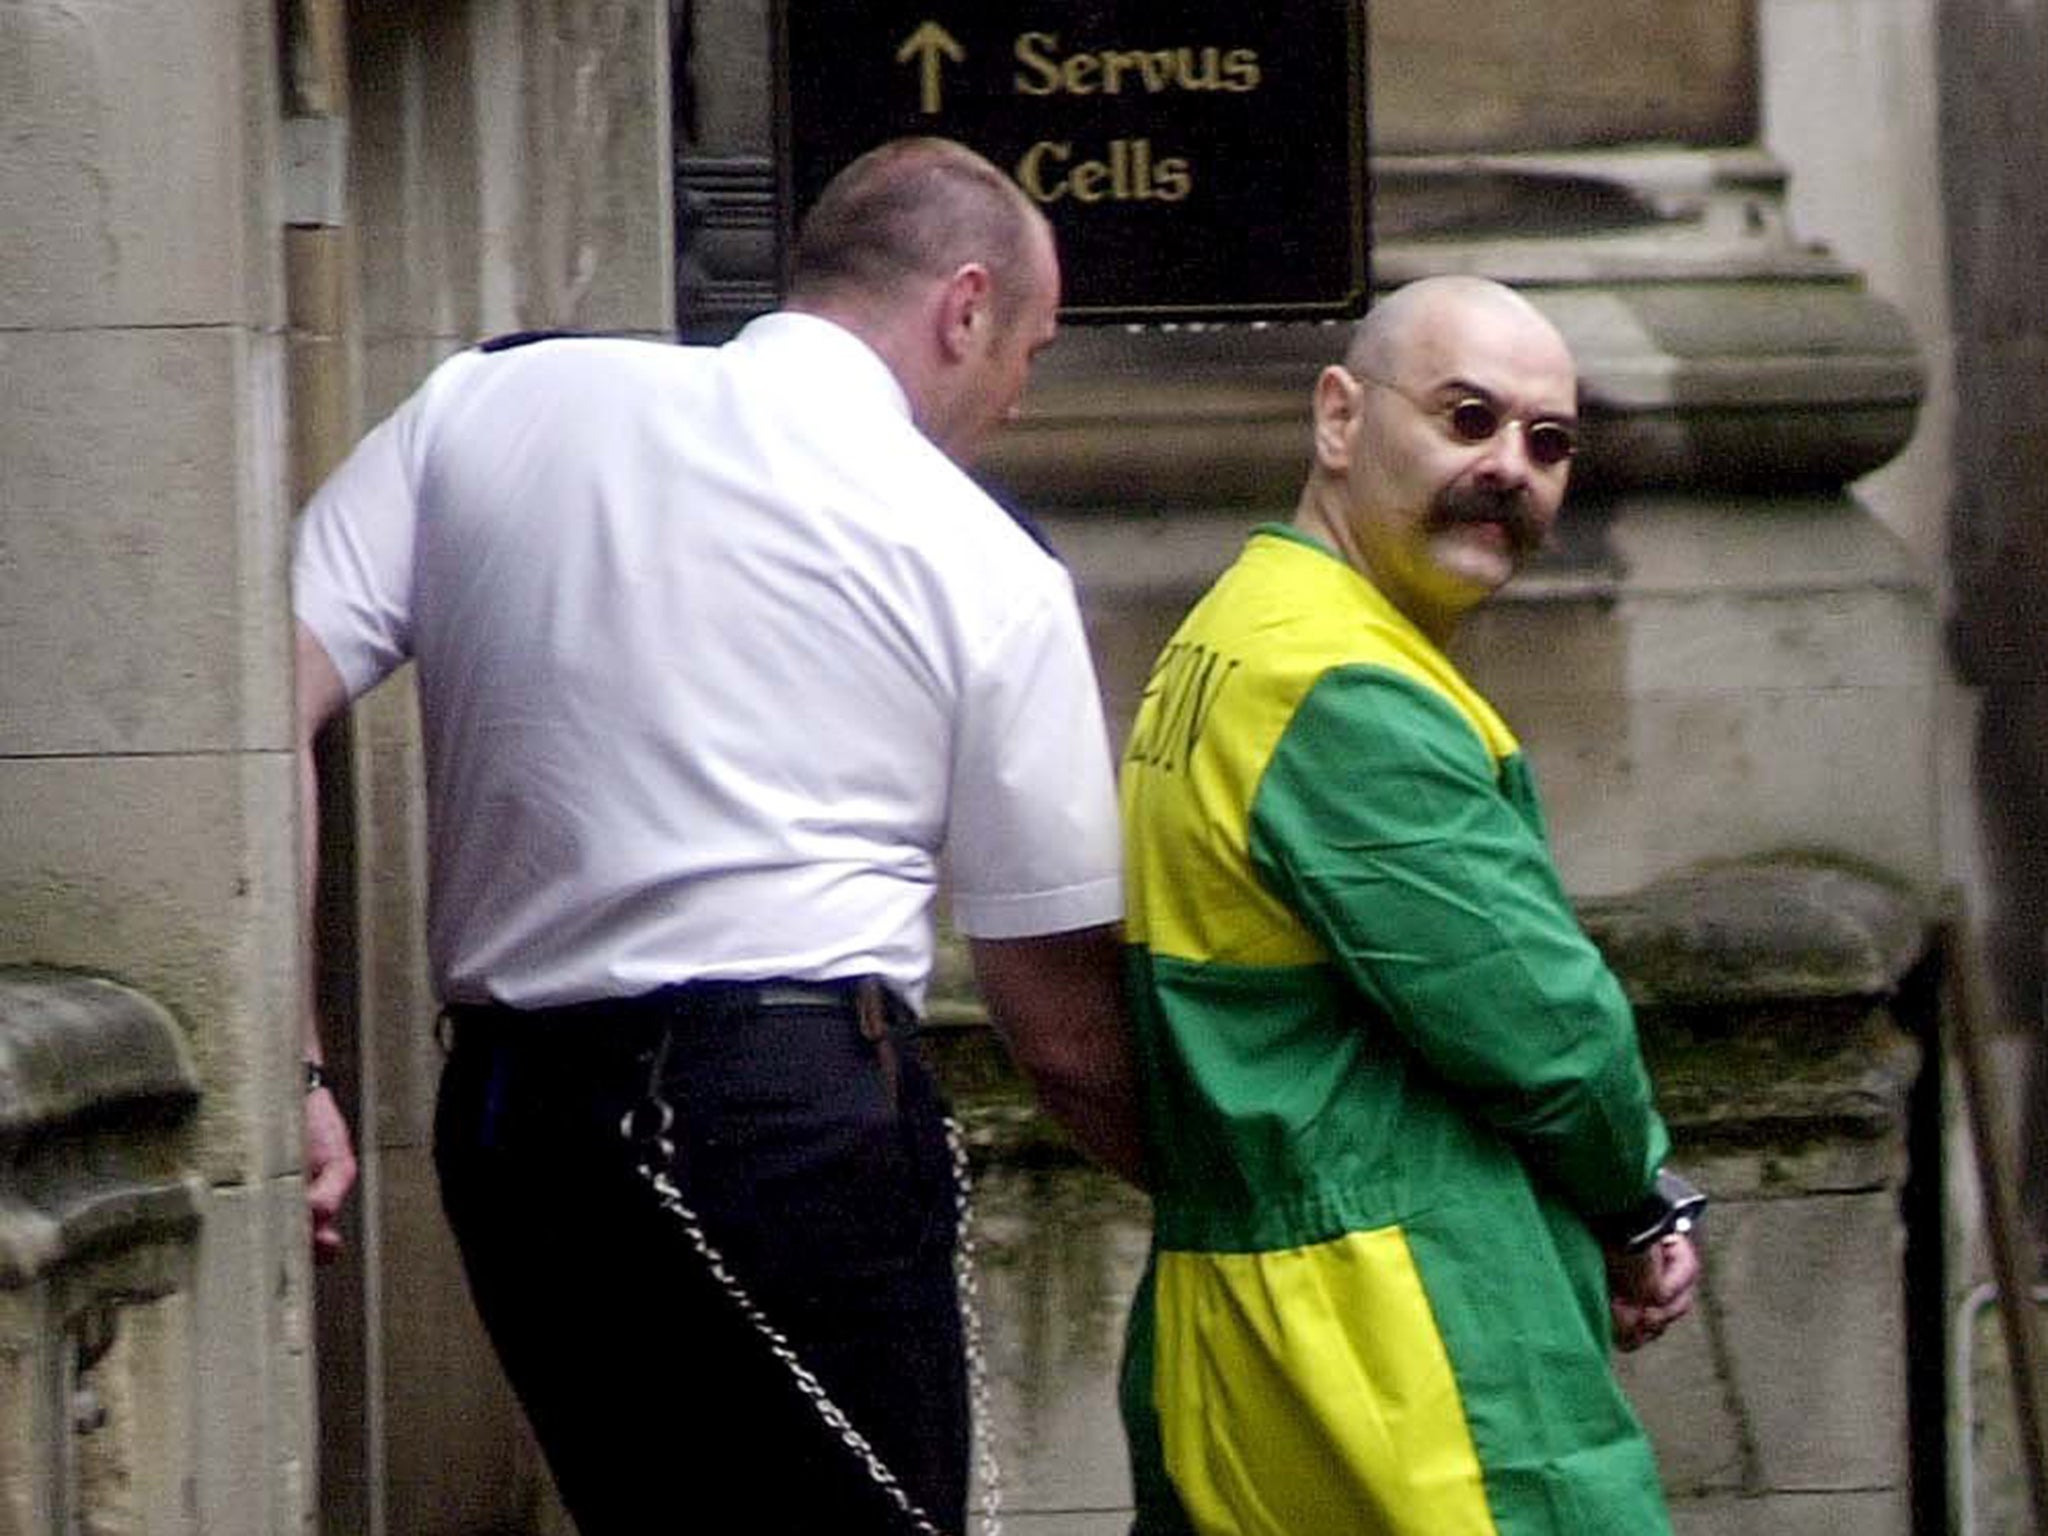 Charles Bronson has been behind bars for nearly half a century